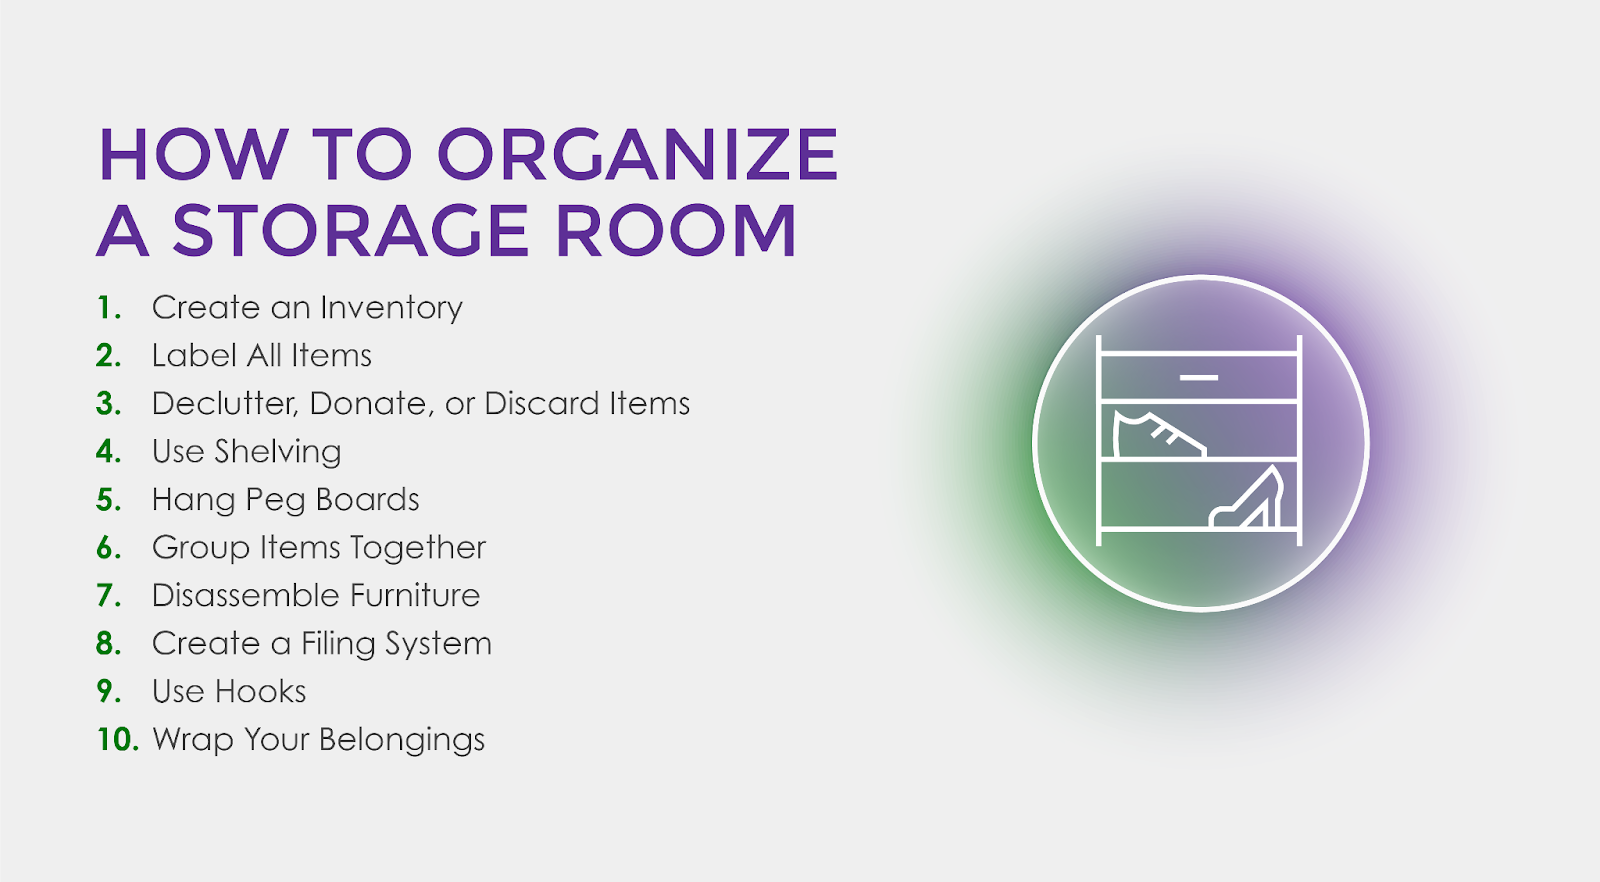 How to organize a storage room